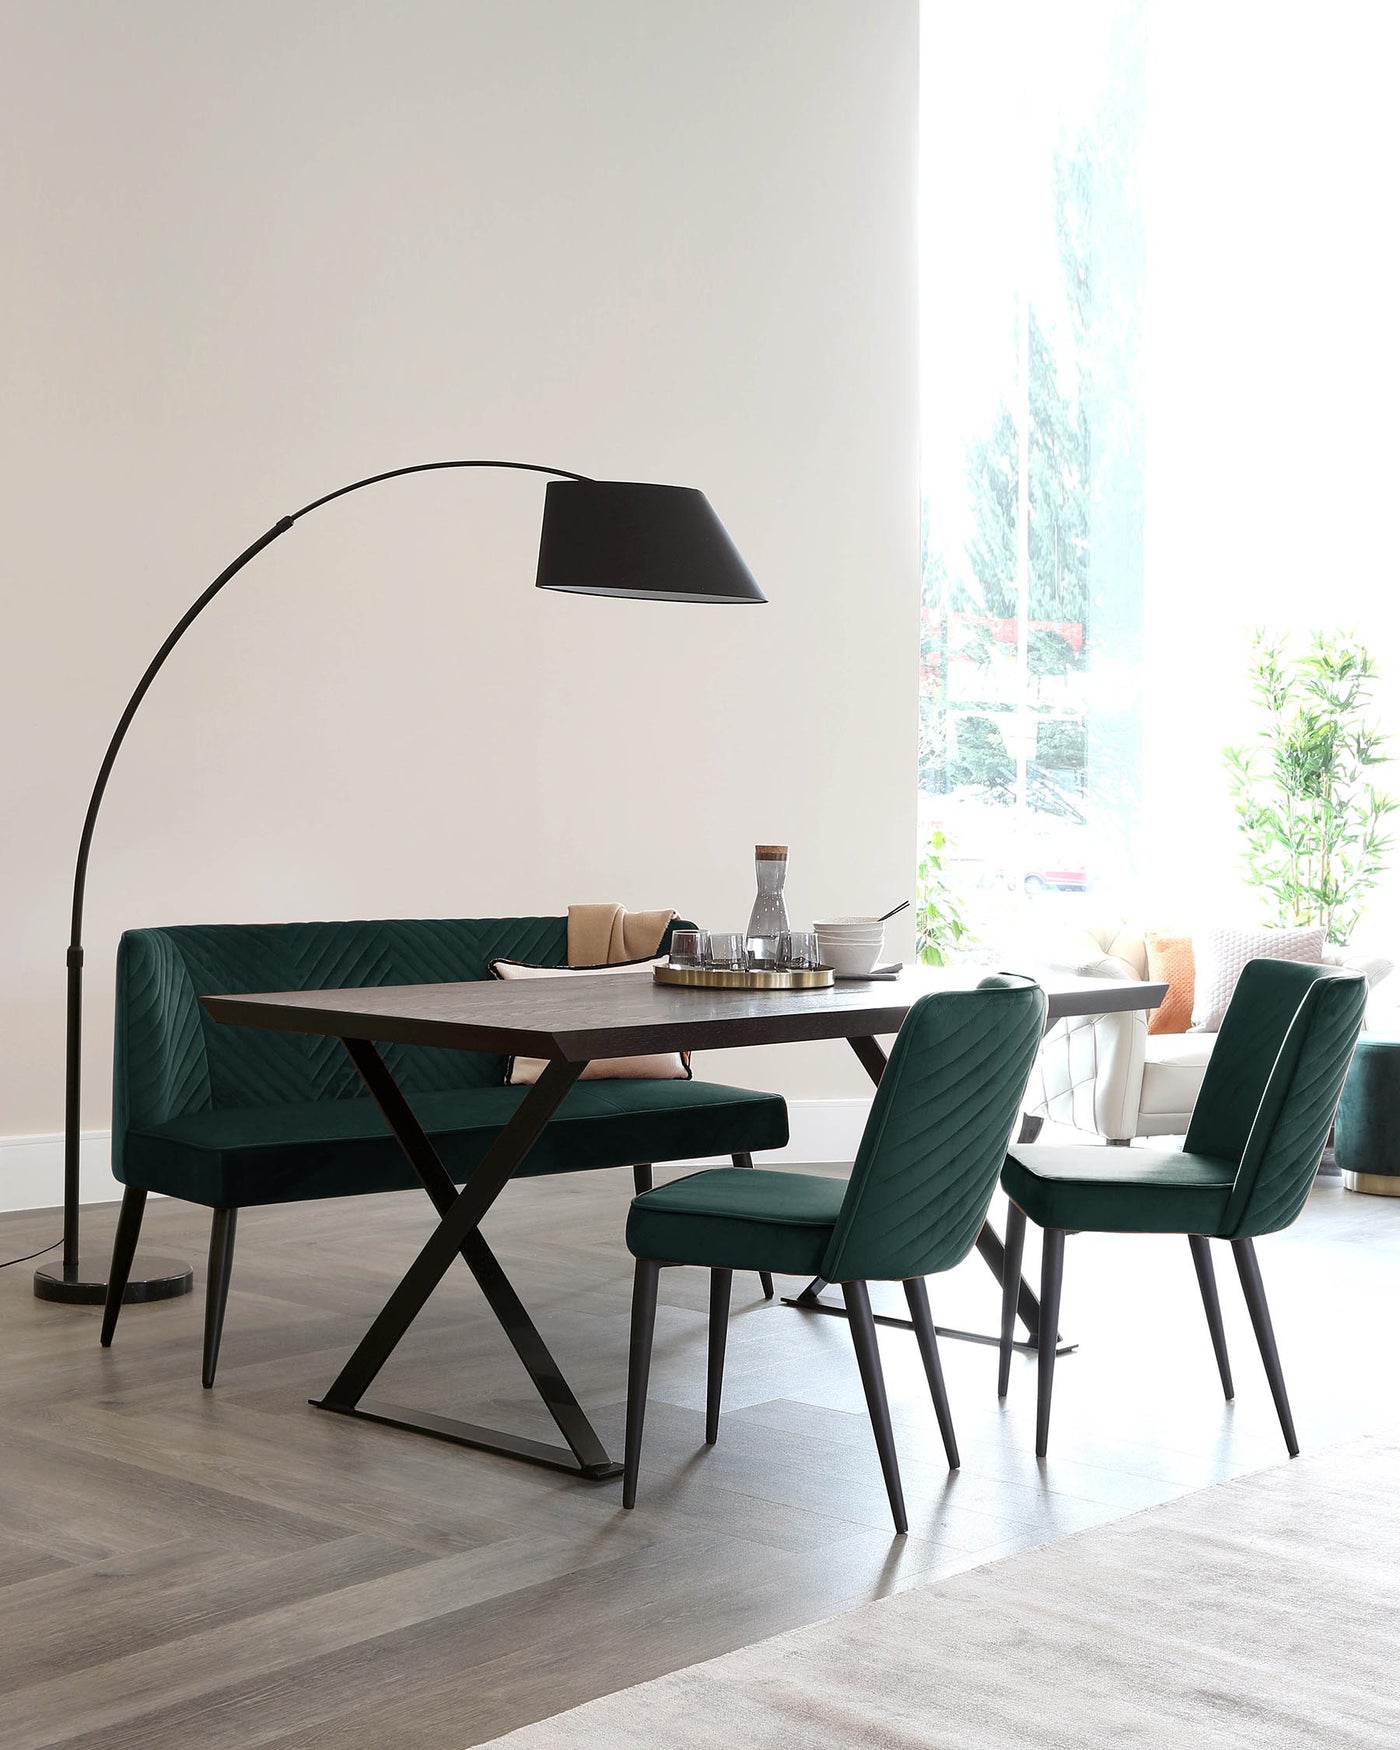 Modern dining room with a dark wooden table with an X-shaped metal base, surrounded by three teal upholstered dining chairs with black metal legs. An arched floor lamp with a large black shade looms over the setup.